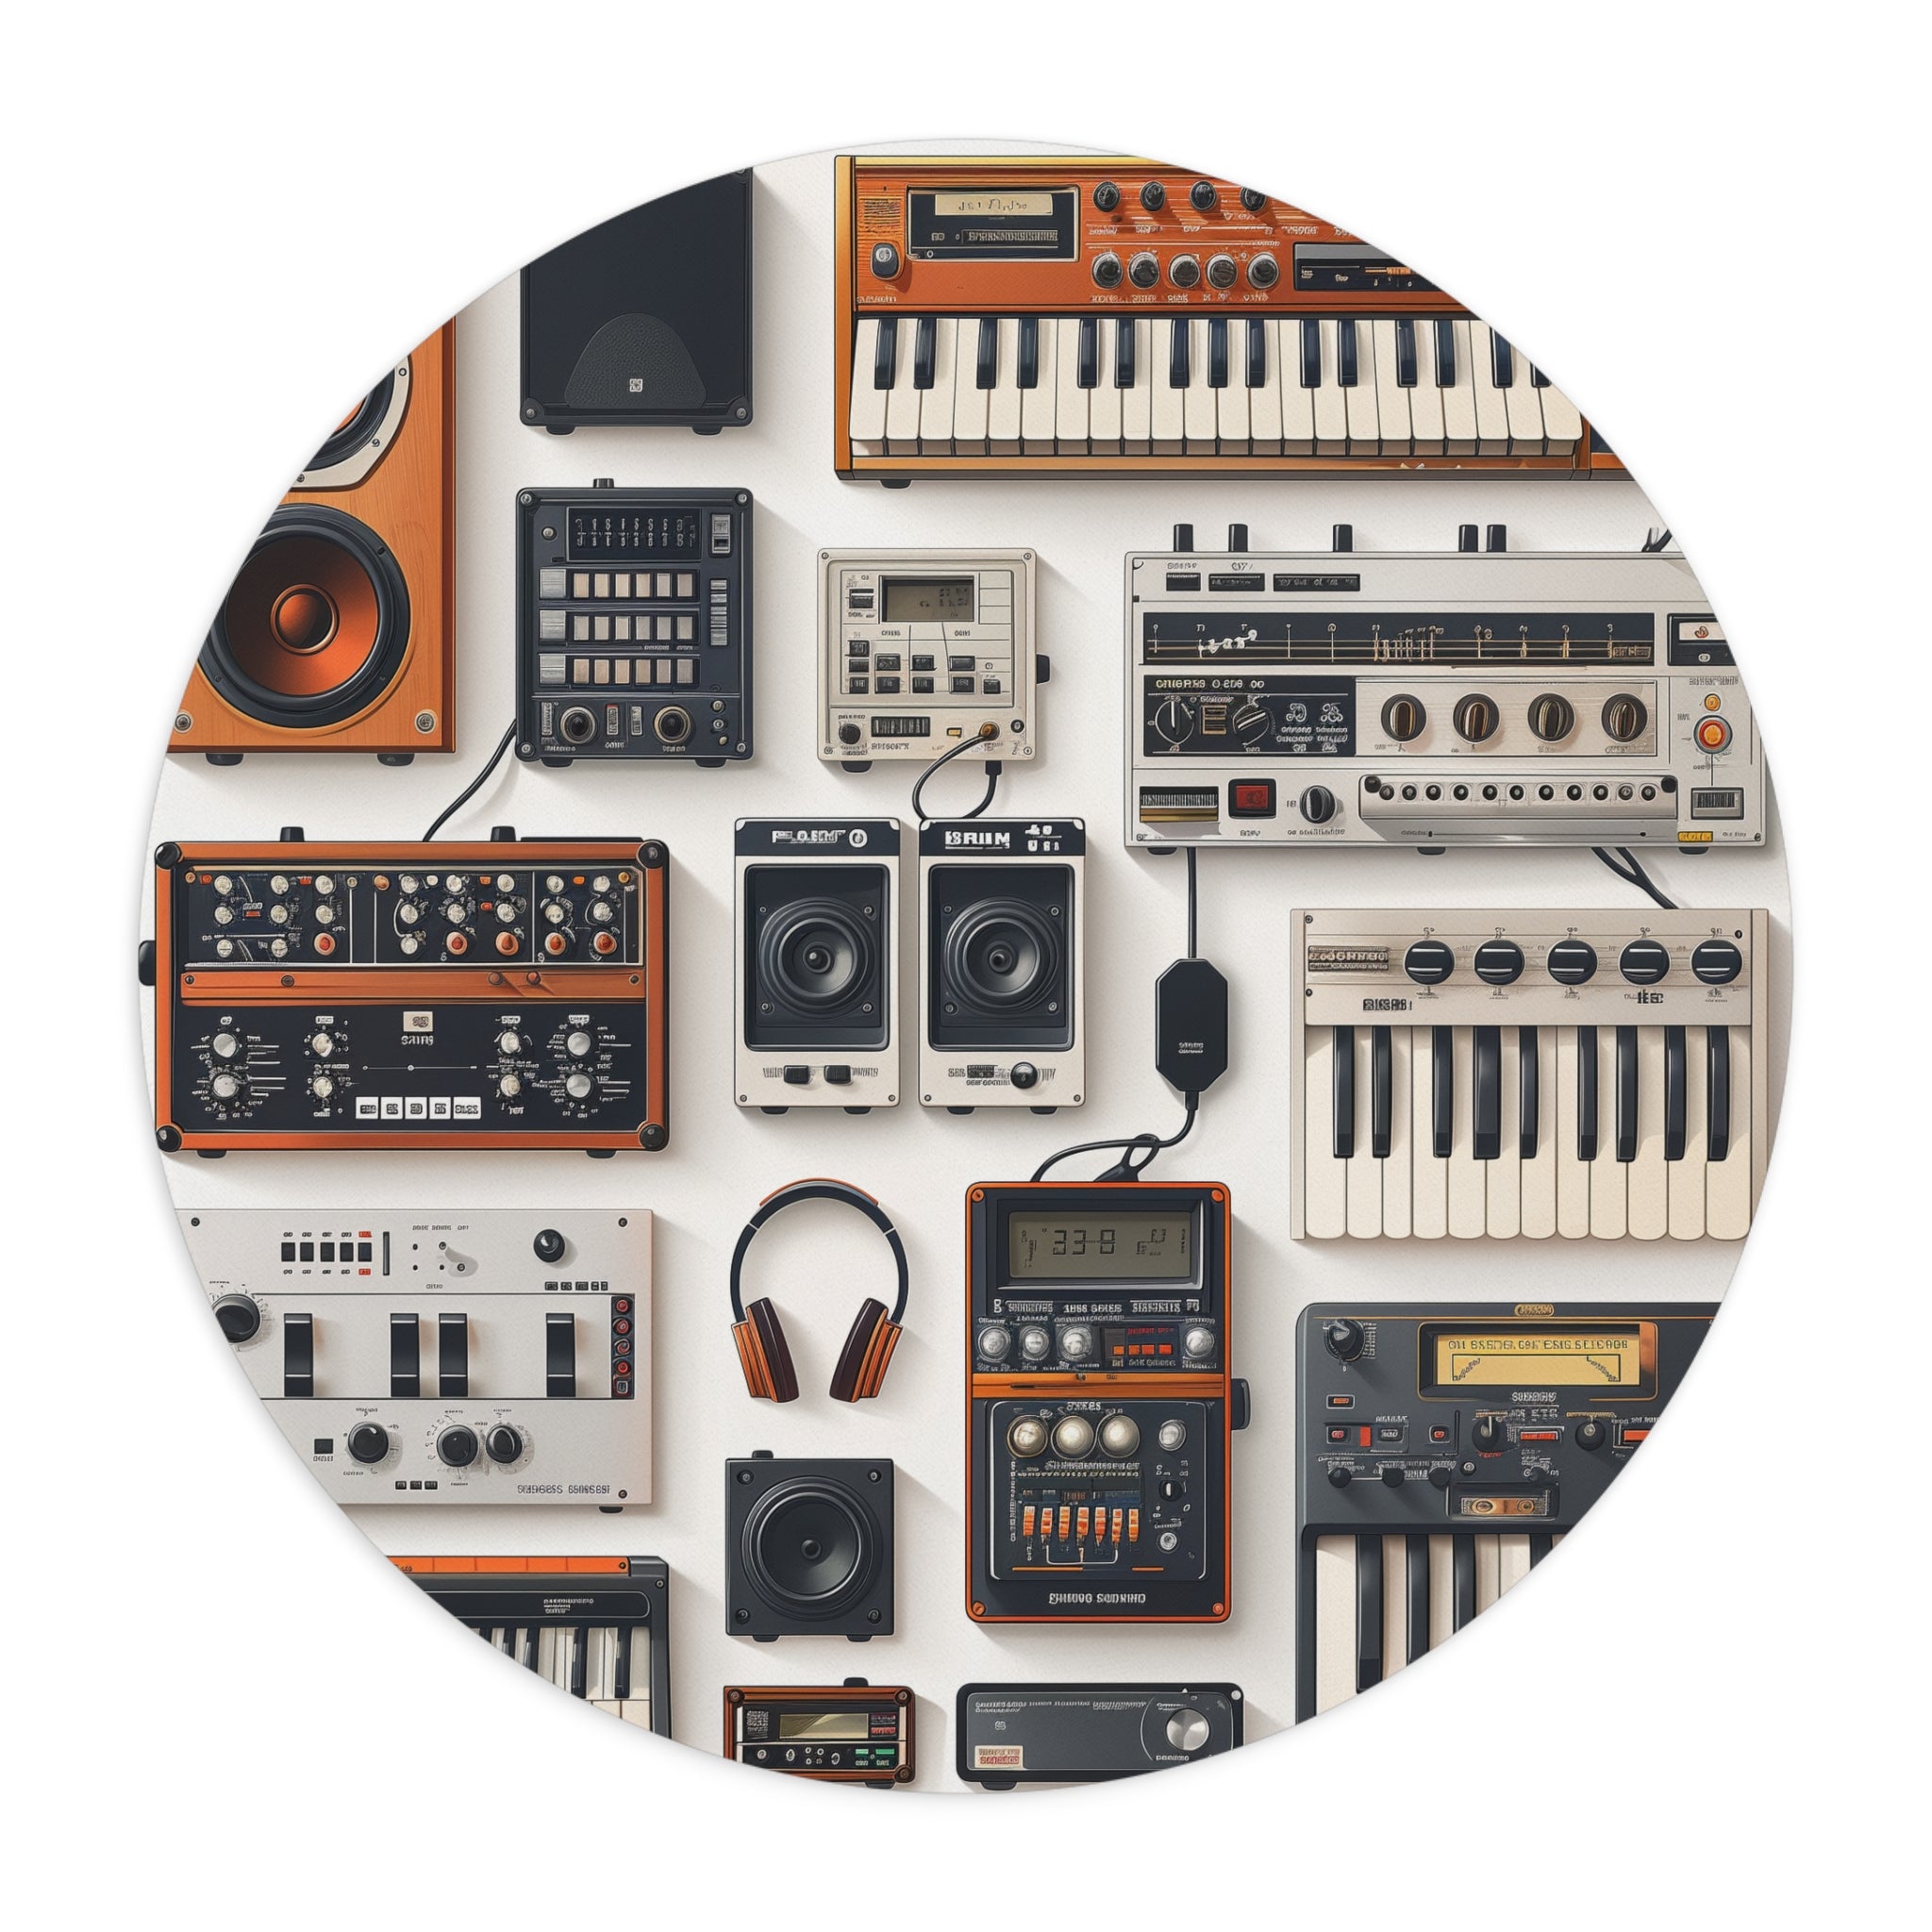 Synth Mousepad for Music Producers